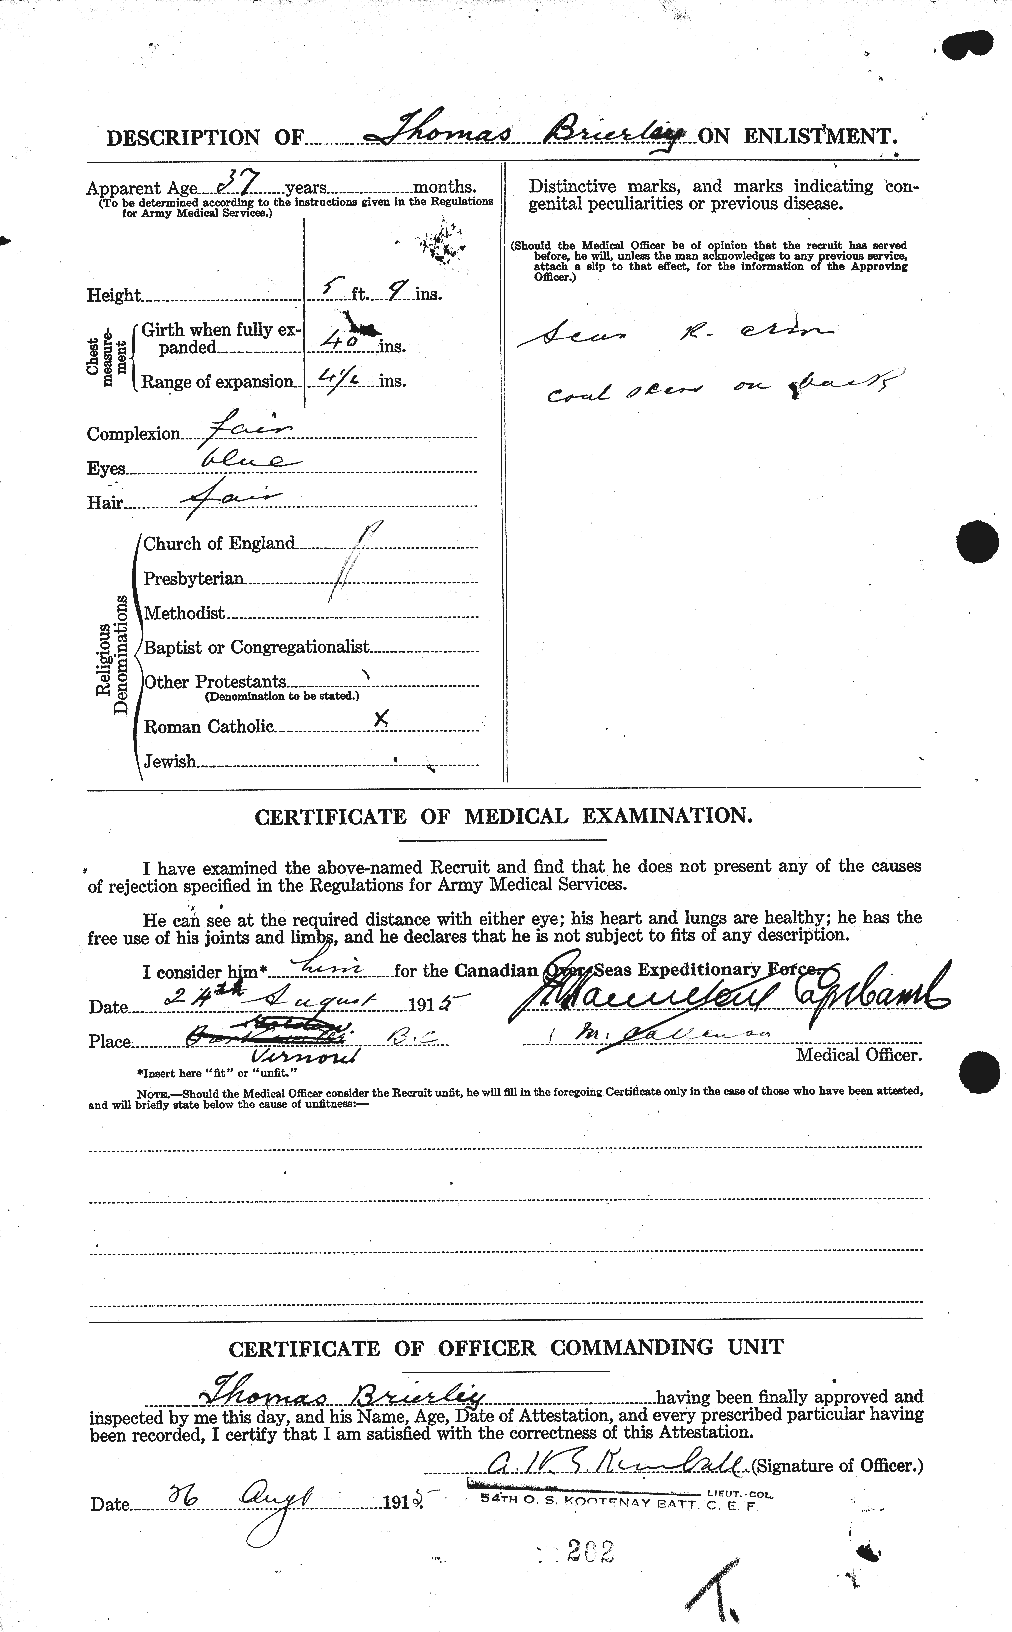 Personnel Records of the First World War - CEF 260018b